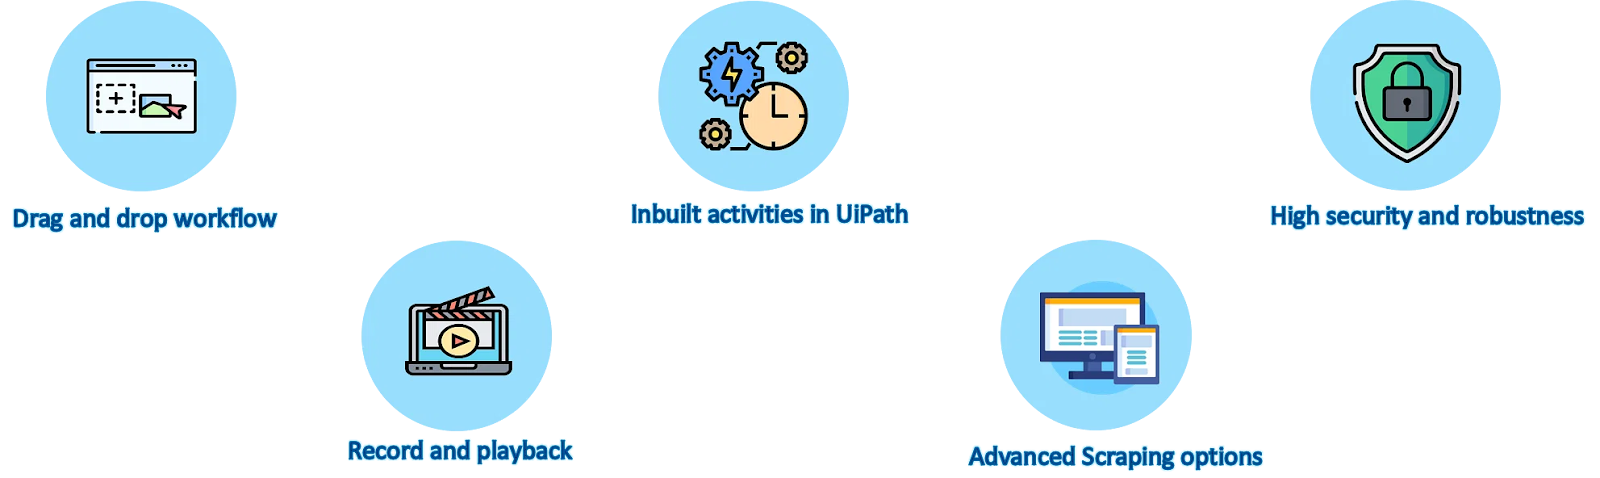 key features of UiPath